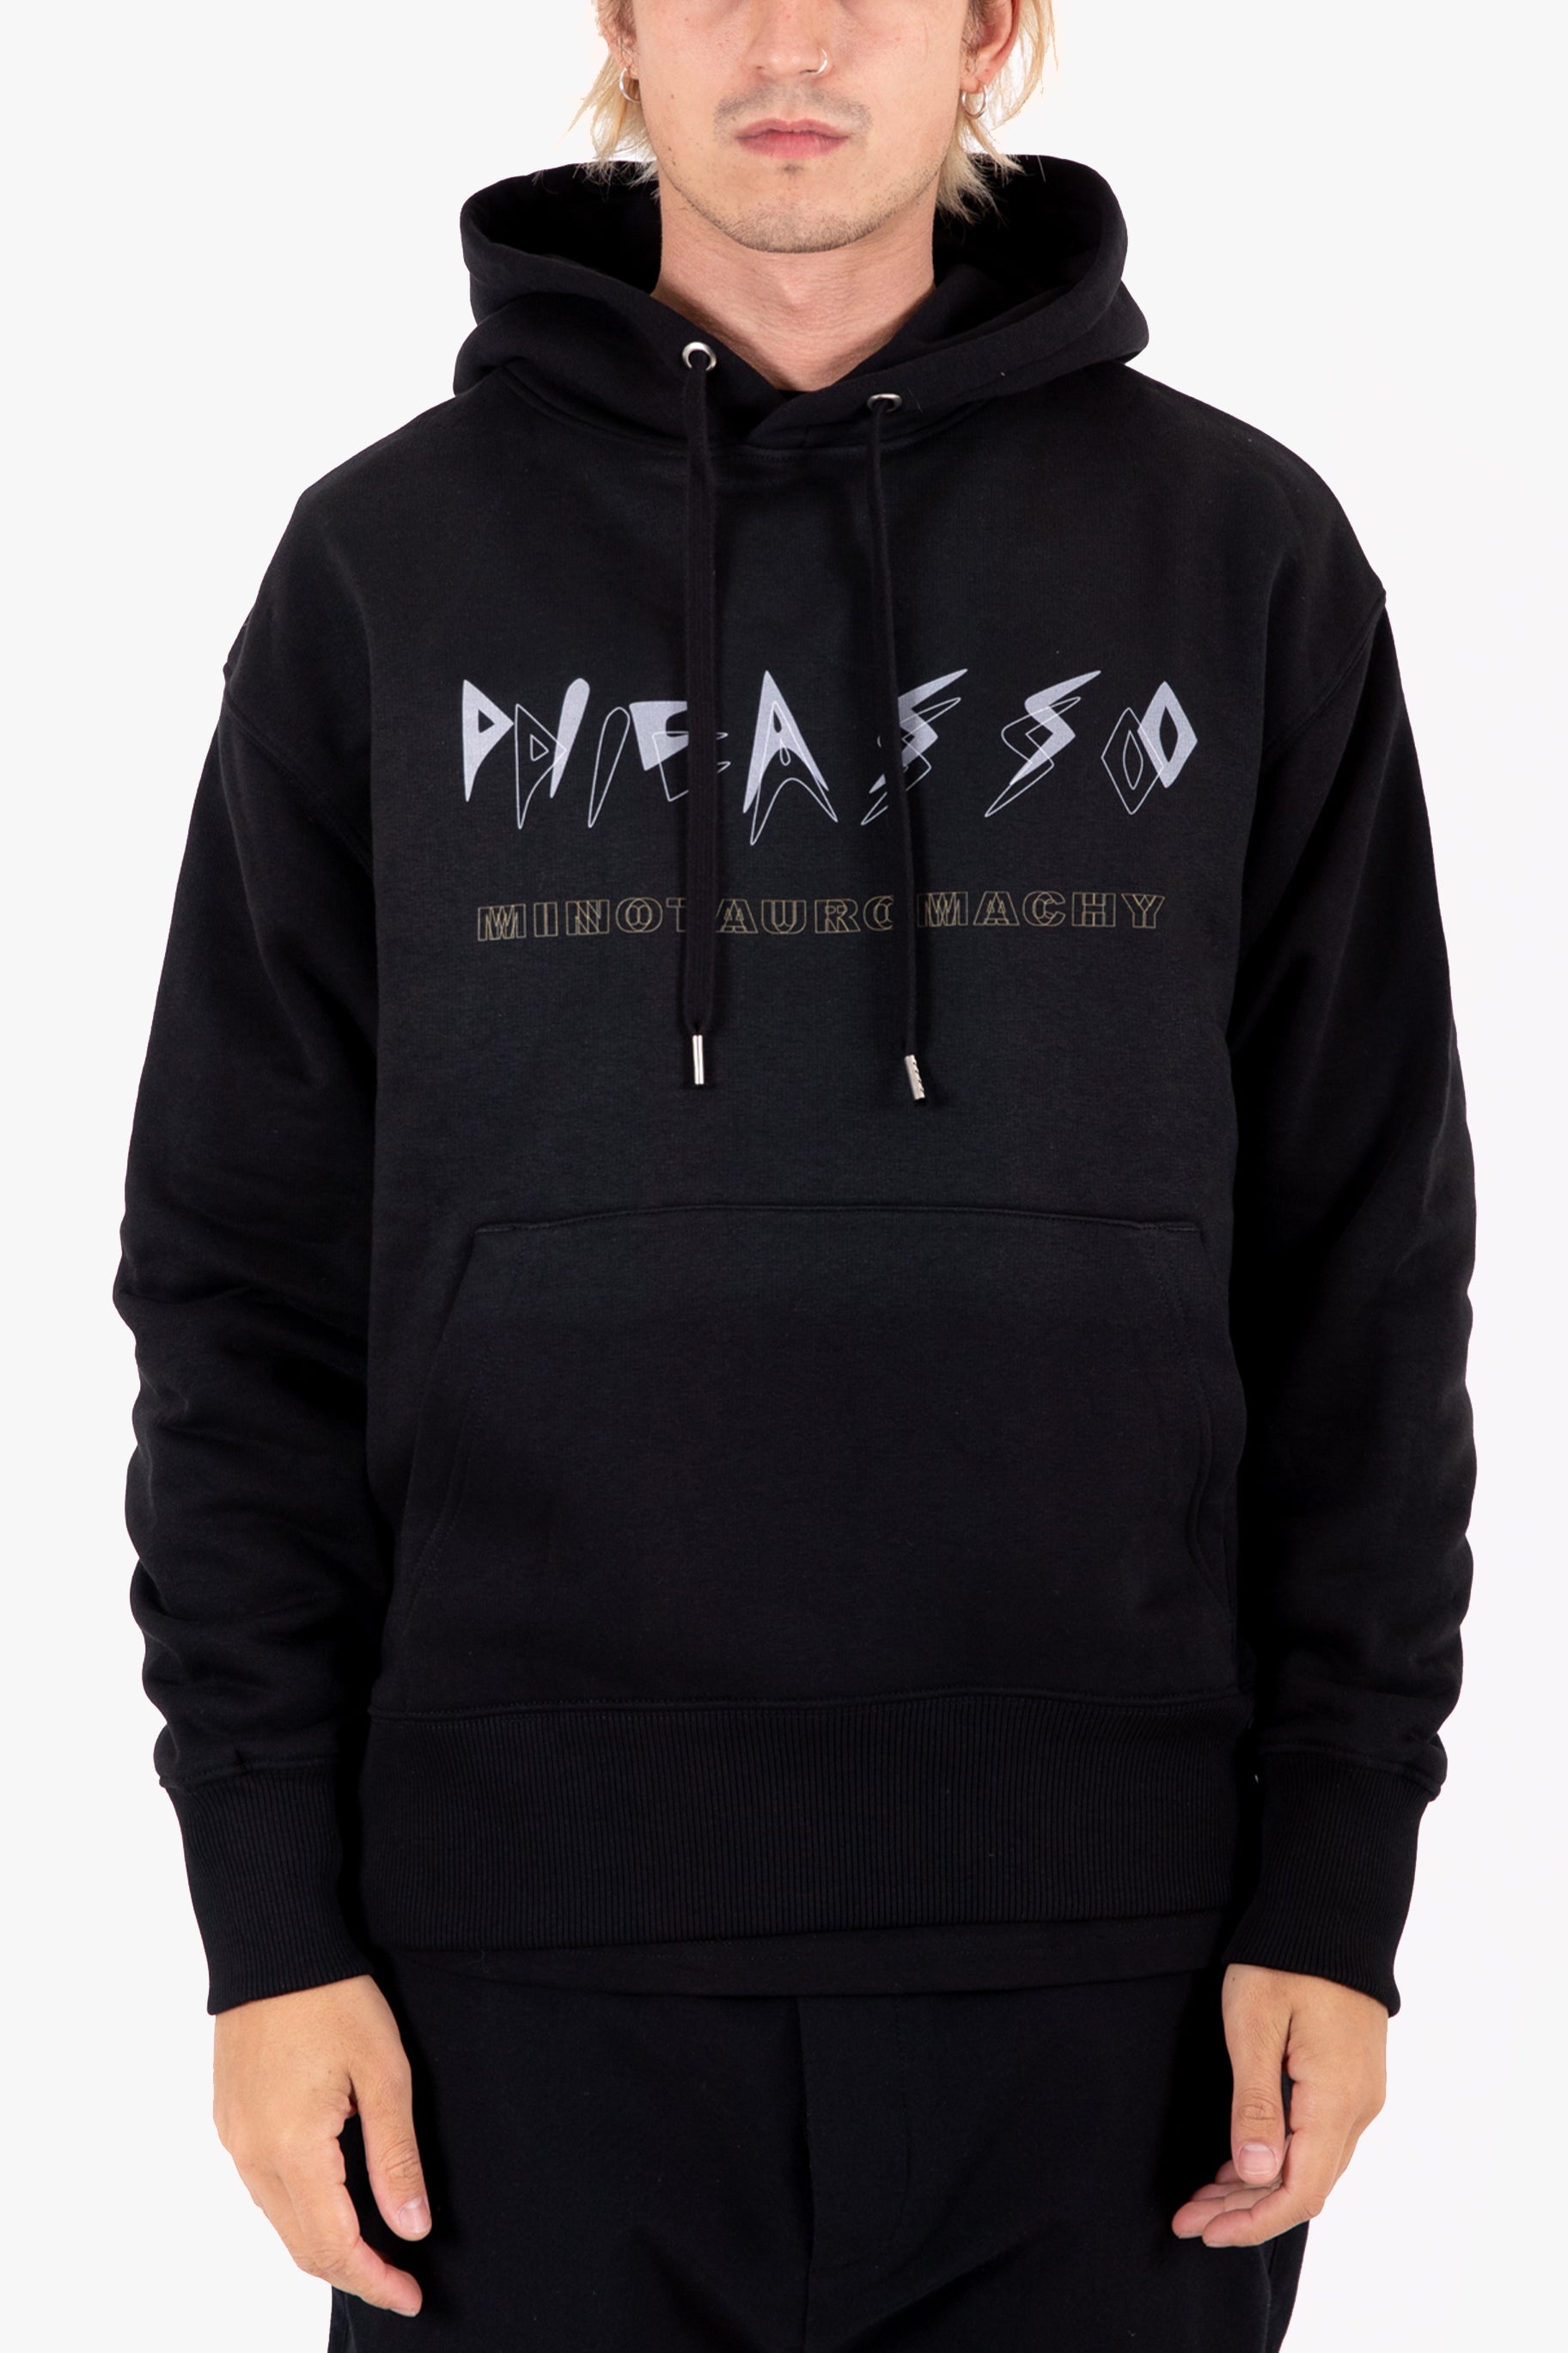 PICASSO hoodie